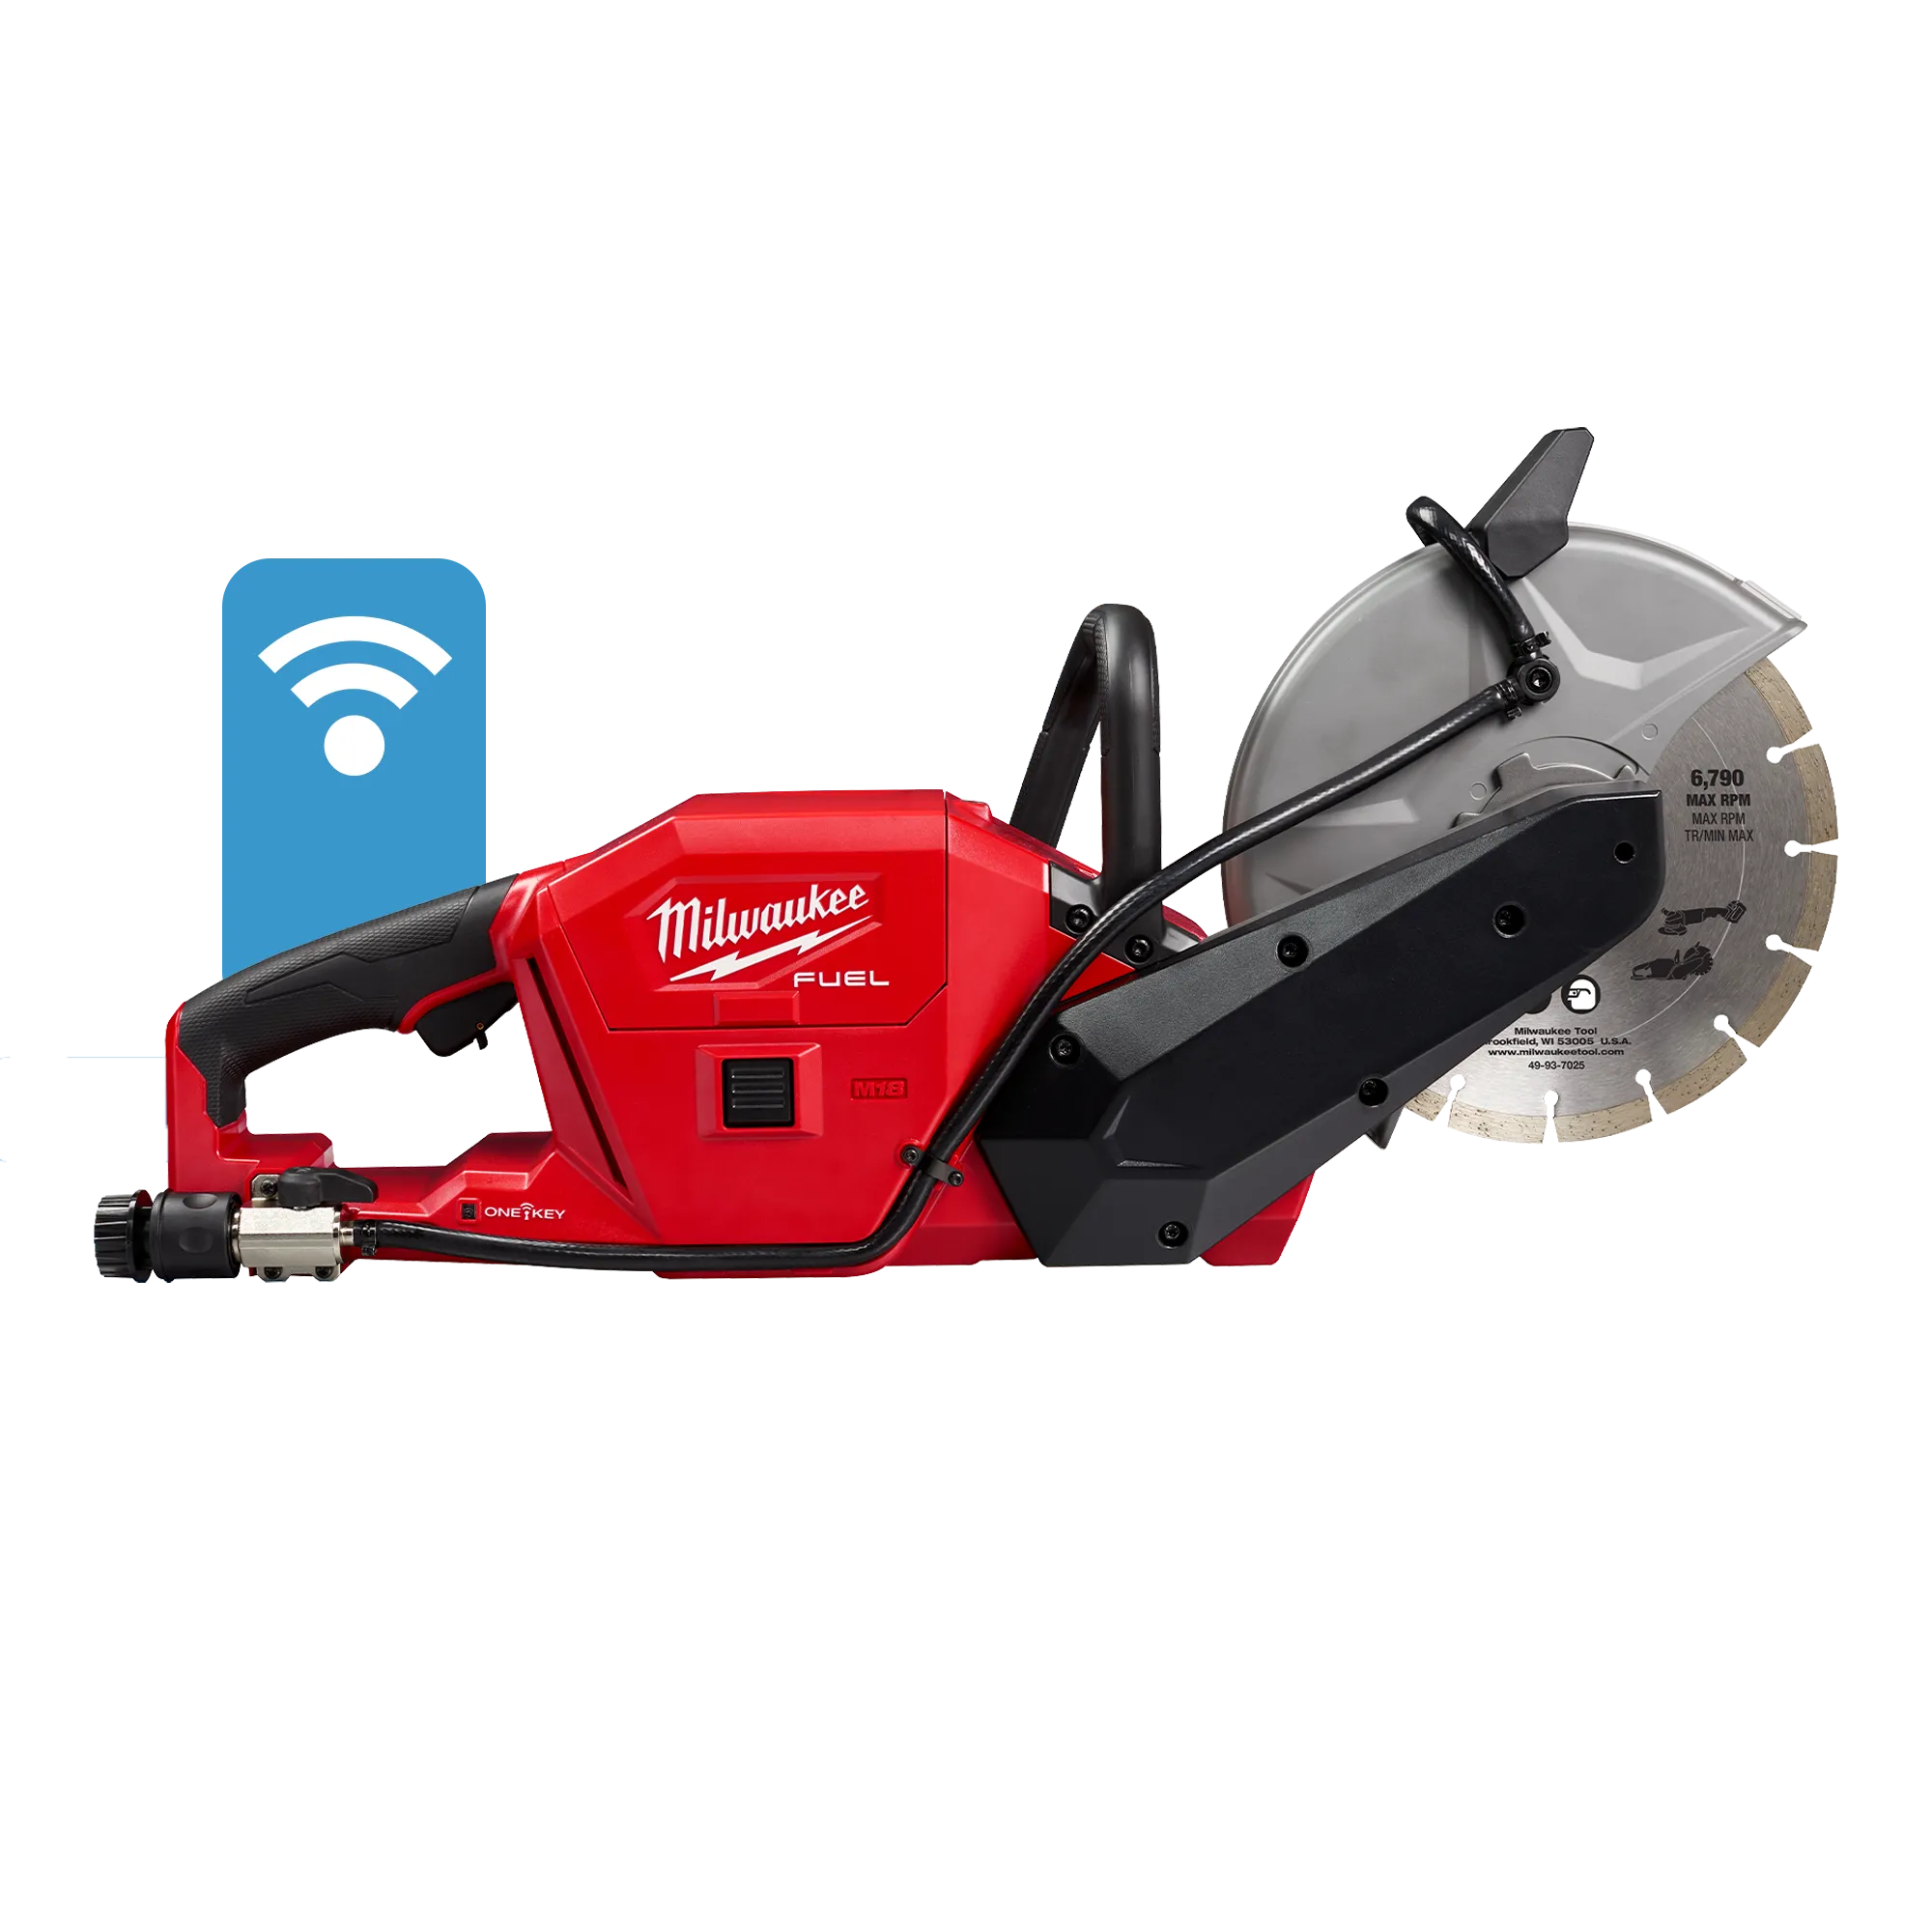 M18 Fuel 9 Cut Off Saw W One Key Milwaukee Tool,Residential Electrical Outlet Wiring Diagram